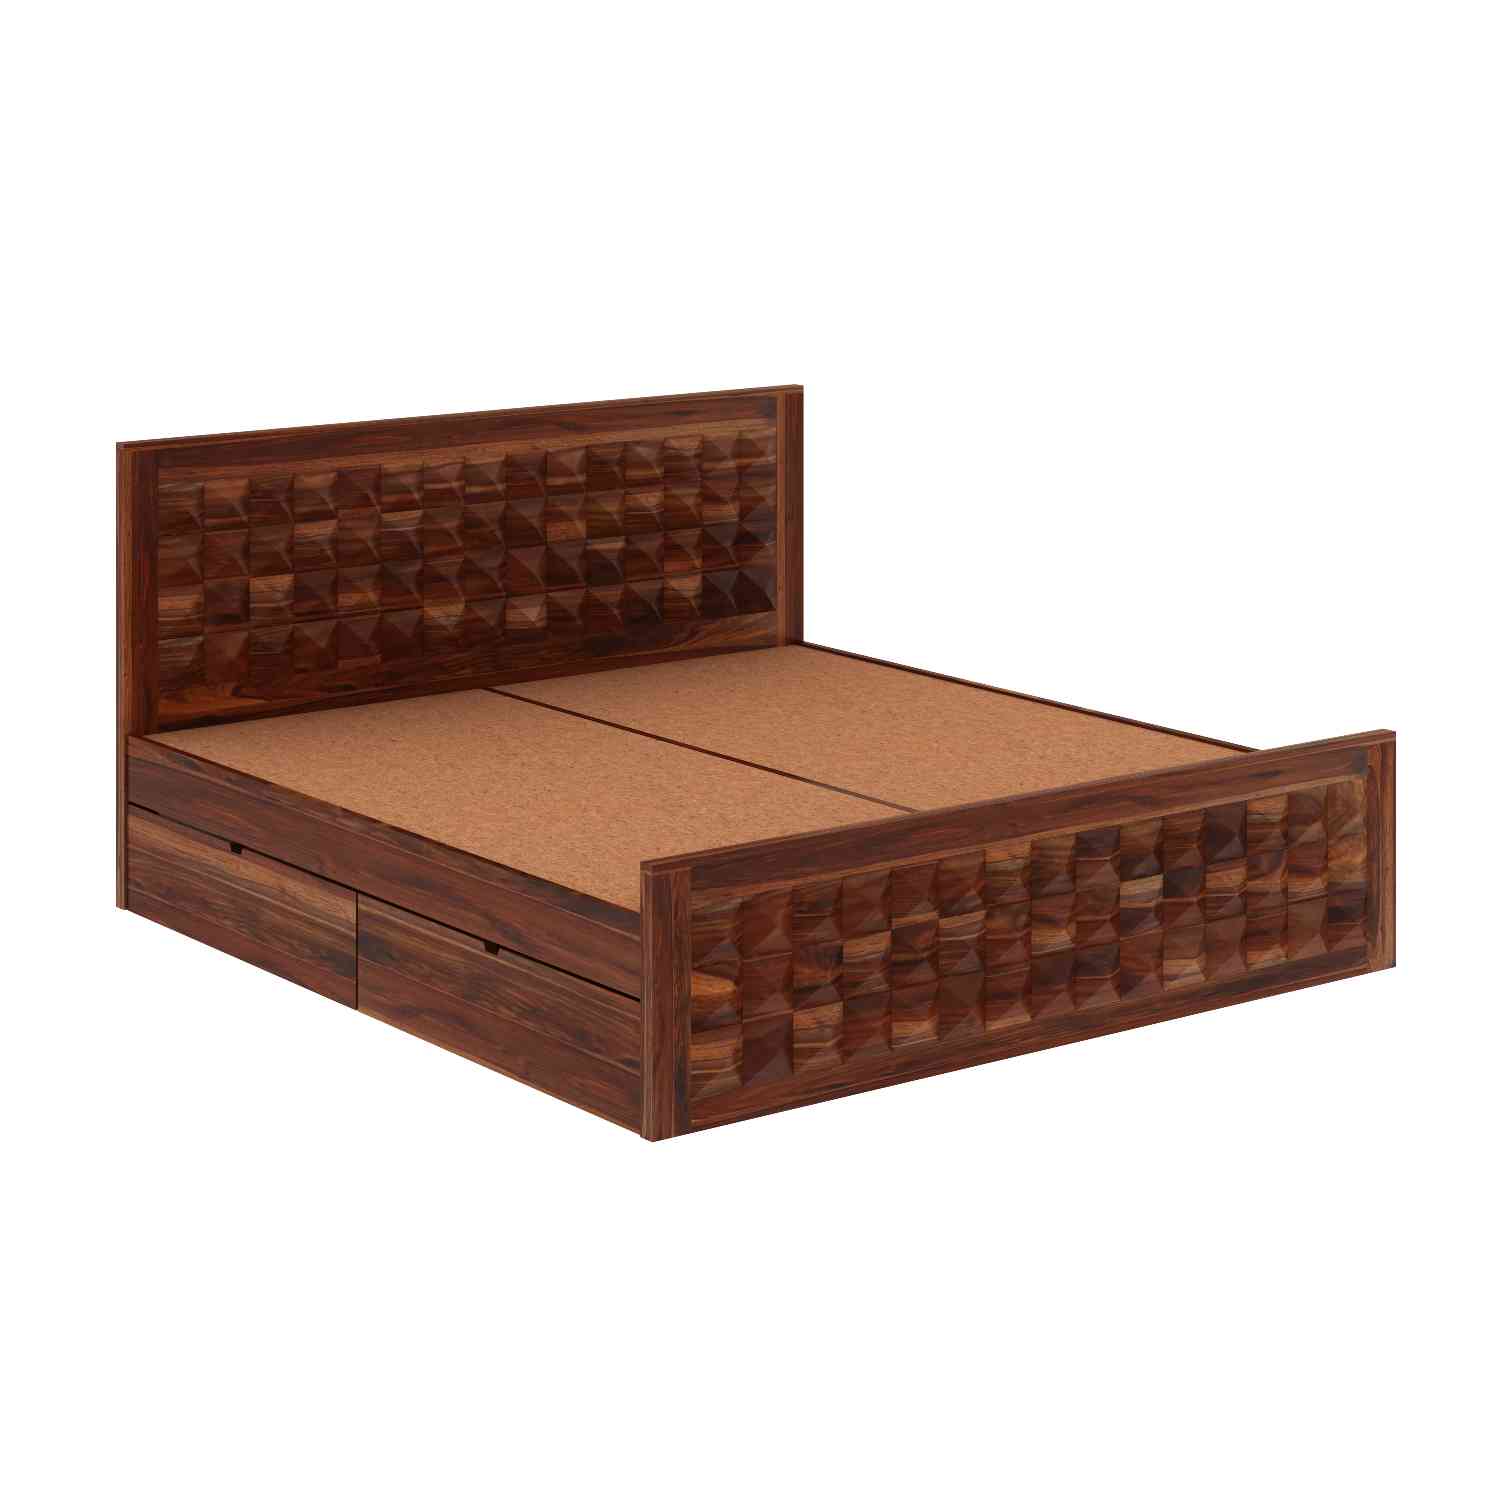 Sofia Solid Sheesham Wood Bed With Four Drawers (Queen Size, Natural Finish)